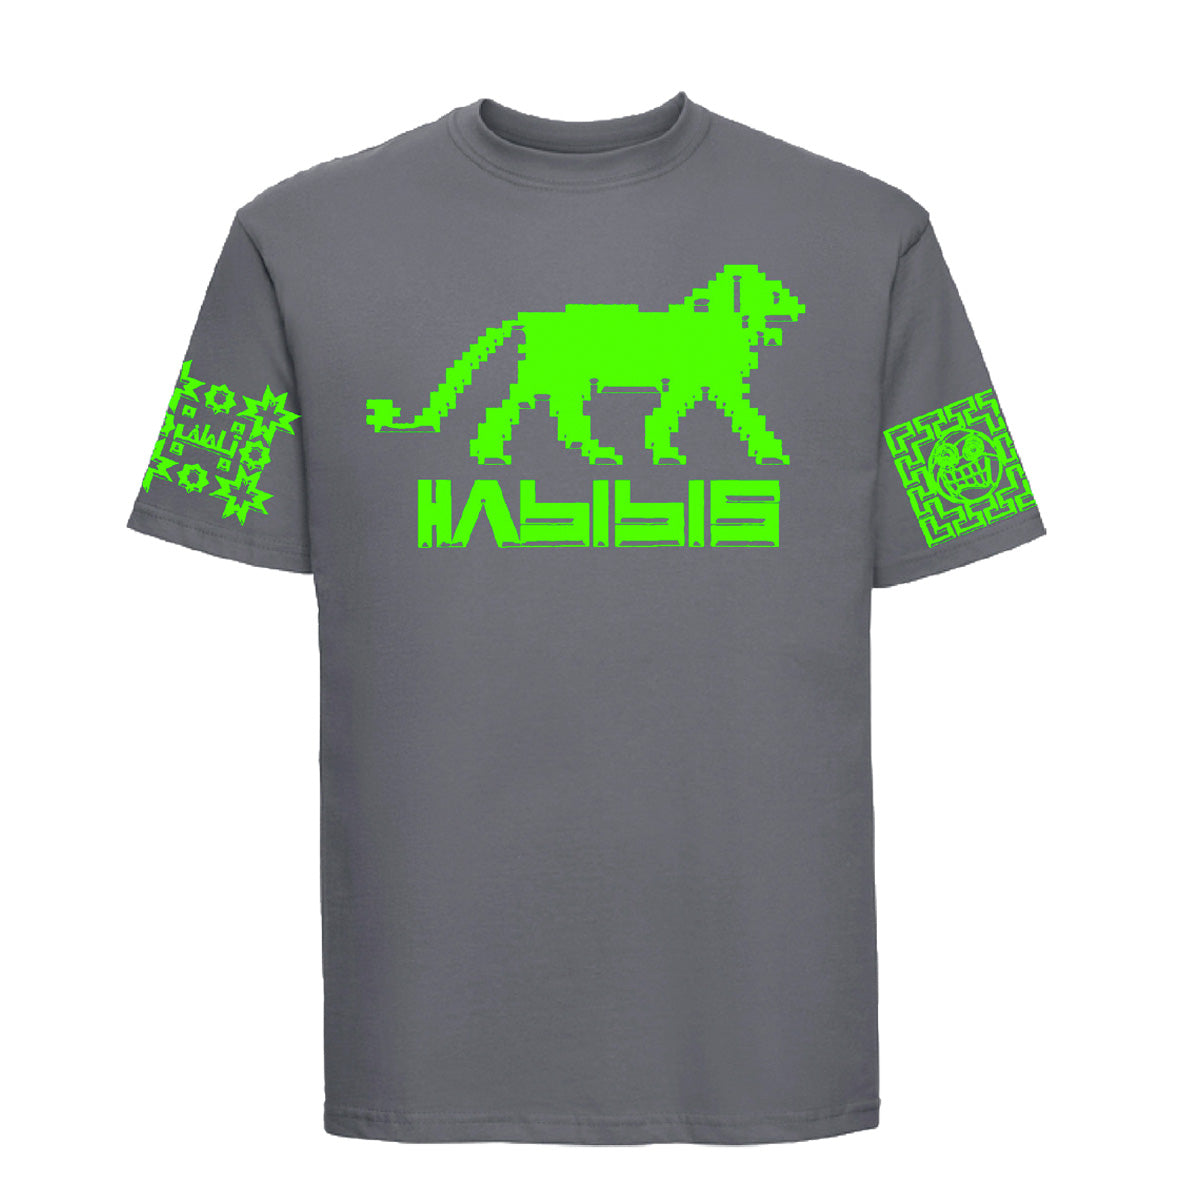 Charcoal grey habibis shortsleeve T-shirt with neon green lion graphic logo on front and sleeves. Free uk shipping over £50